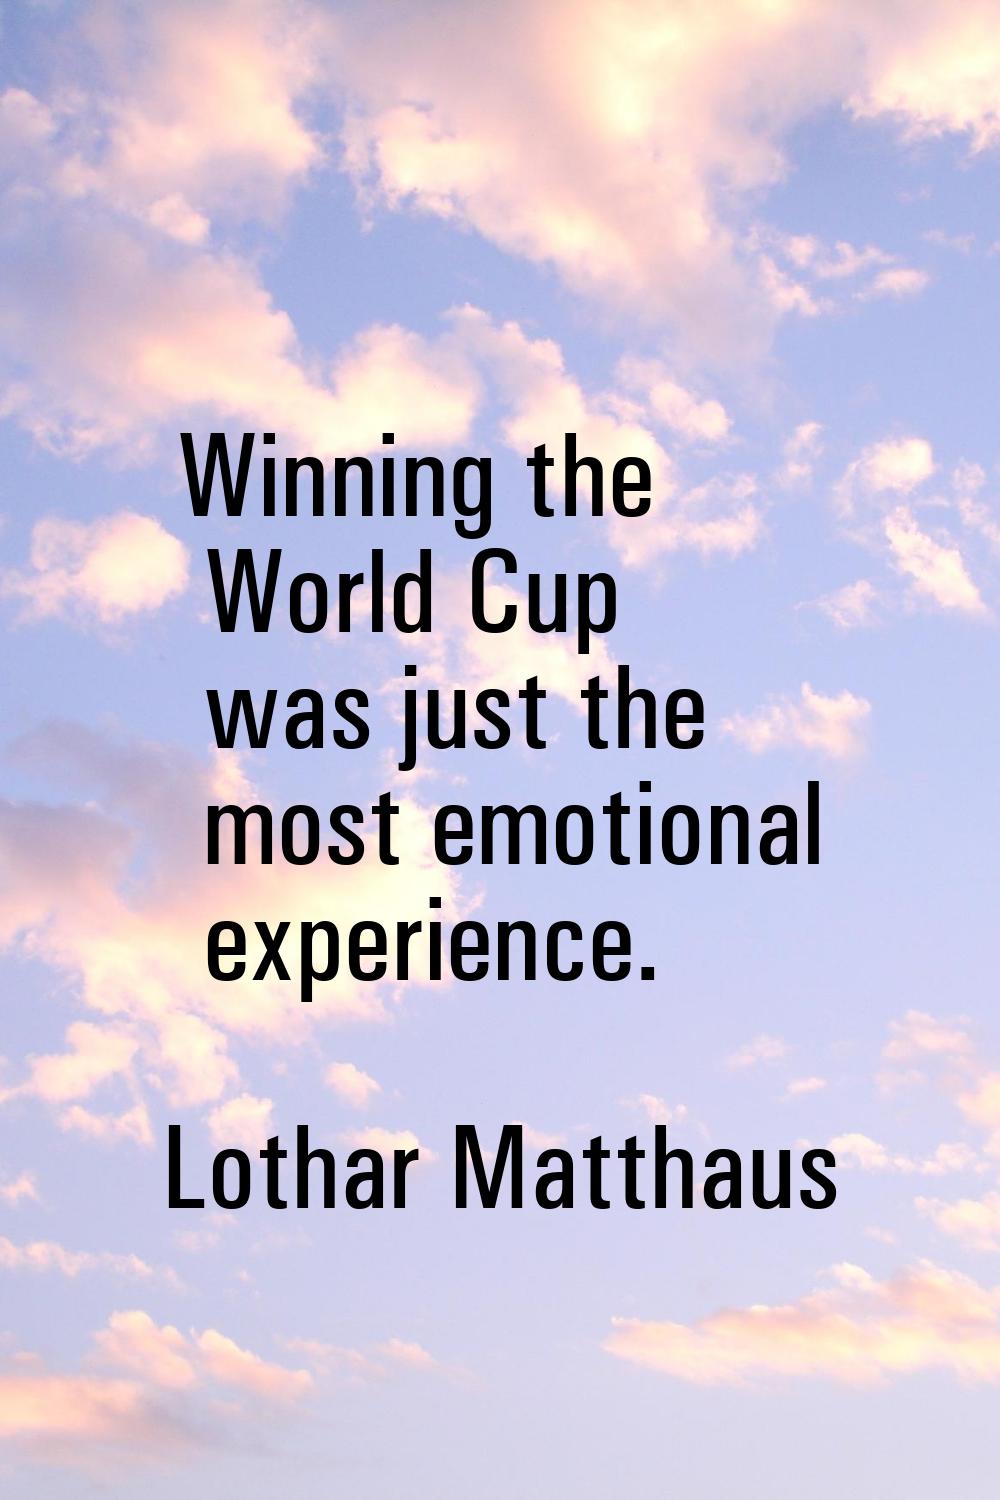 Winning the World Cup was just the most emotional experience.